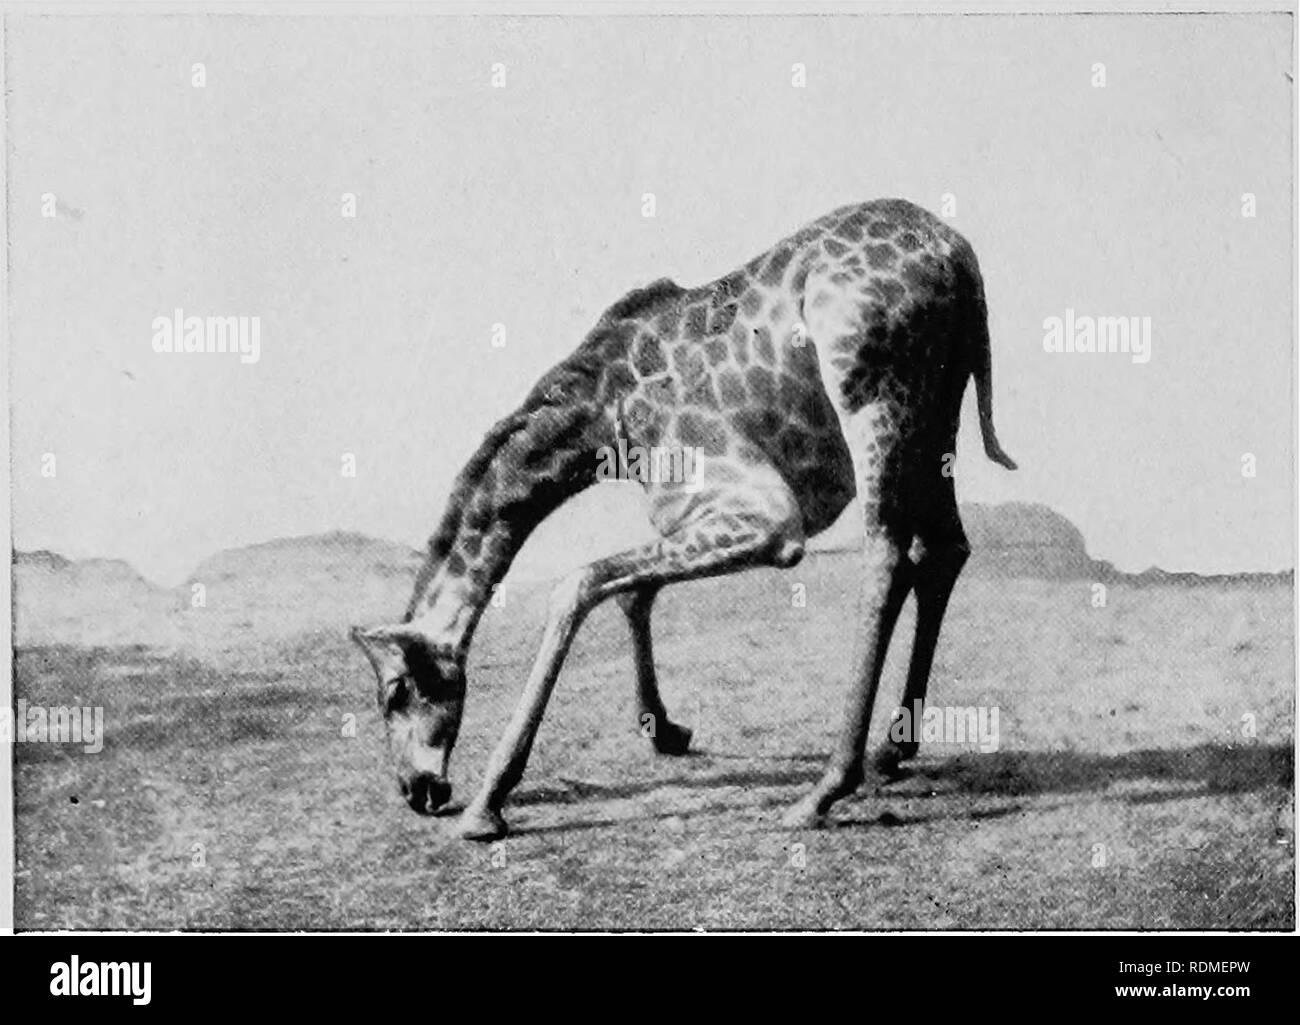 Mammals of other lands;. Mammals. 240 THE LIVING ANIMALS OF THE WORLD.  Phota ty ^. S. Rudland & Sons A GIRAFFE GRAZING Grazing is evidently  not the natural mode of feeding